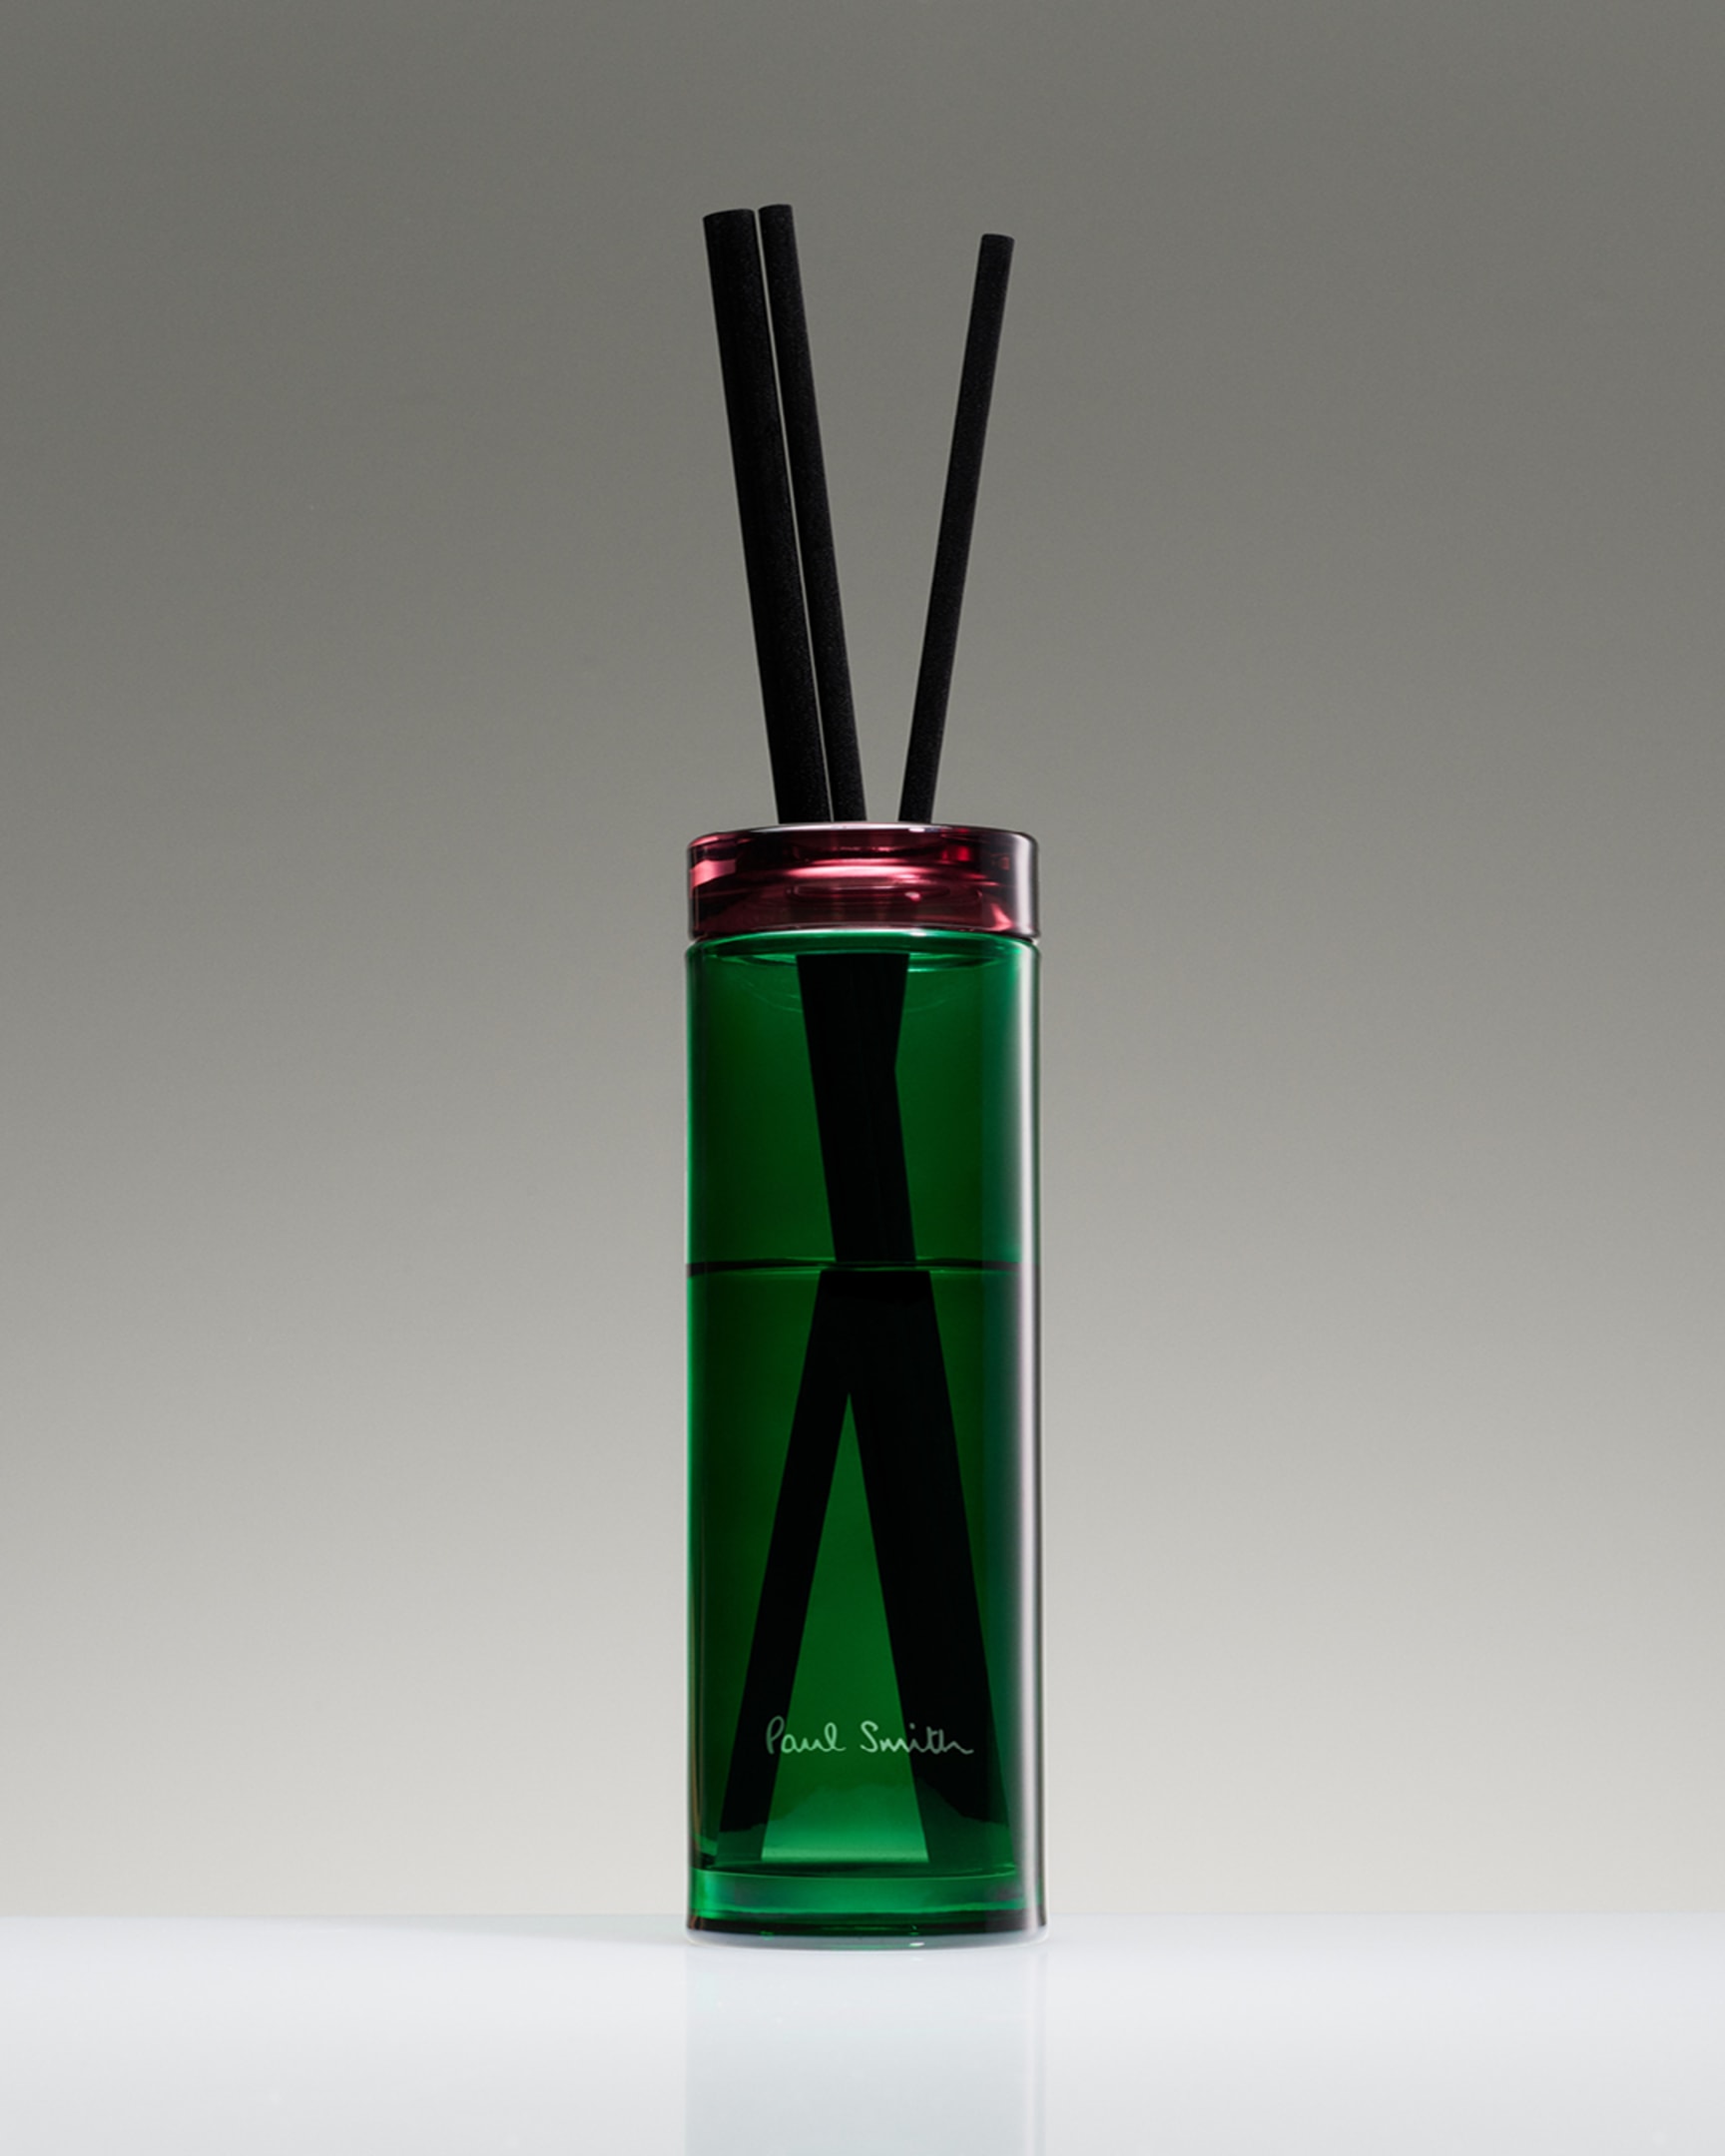 Detail View - Paul Smith Botanist Diffuser, 250ml Paul Smith